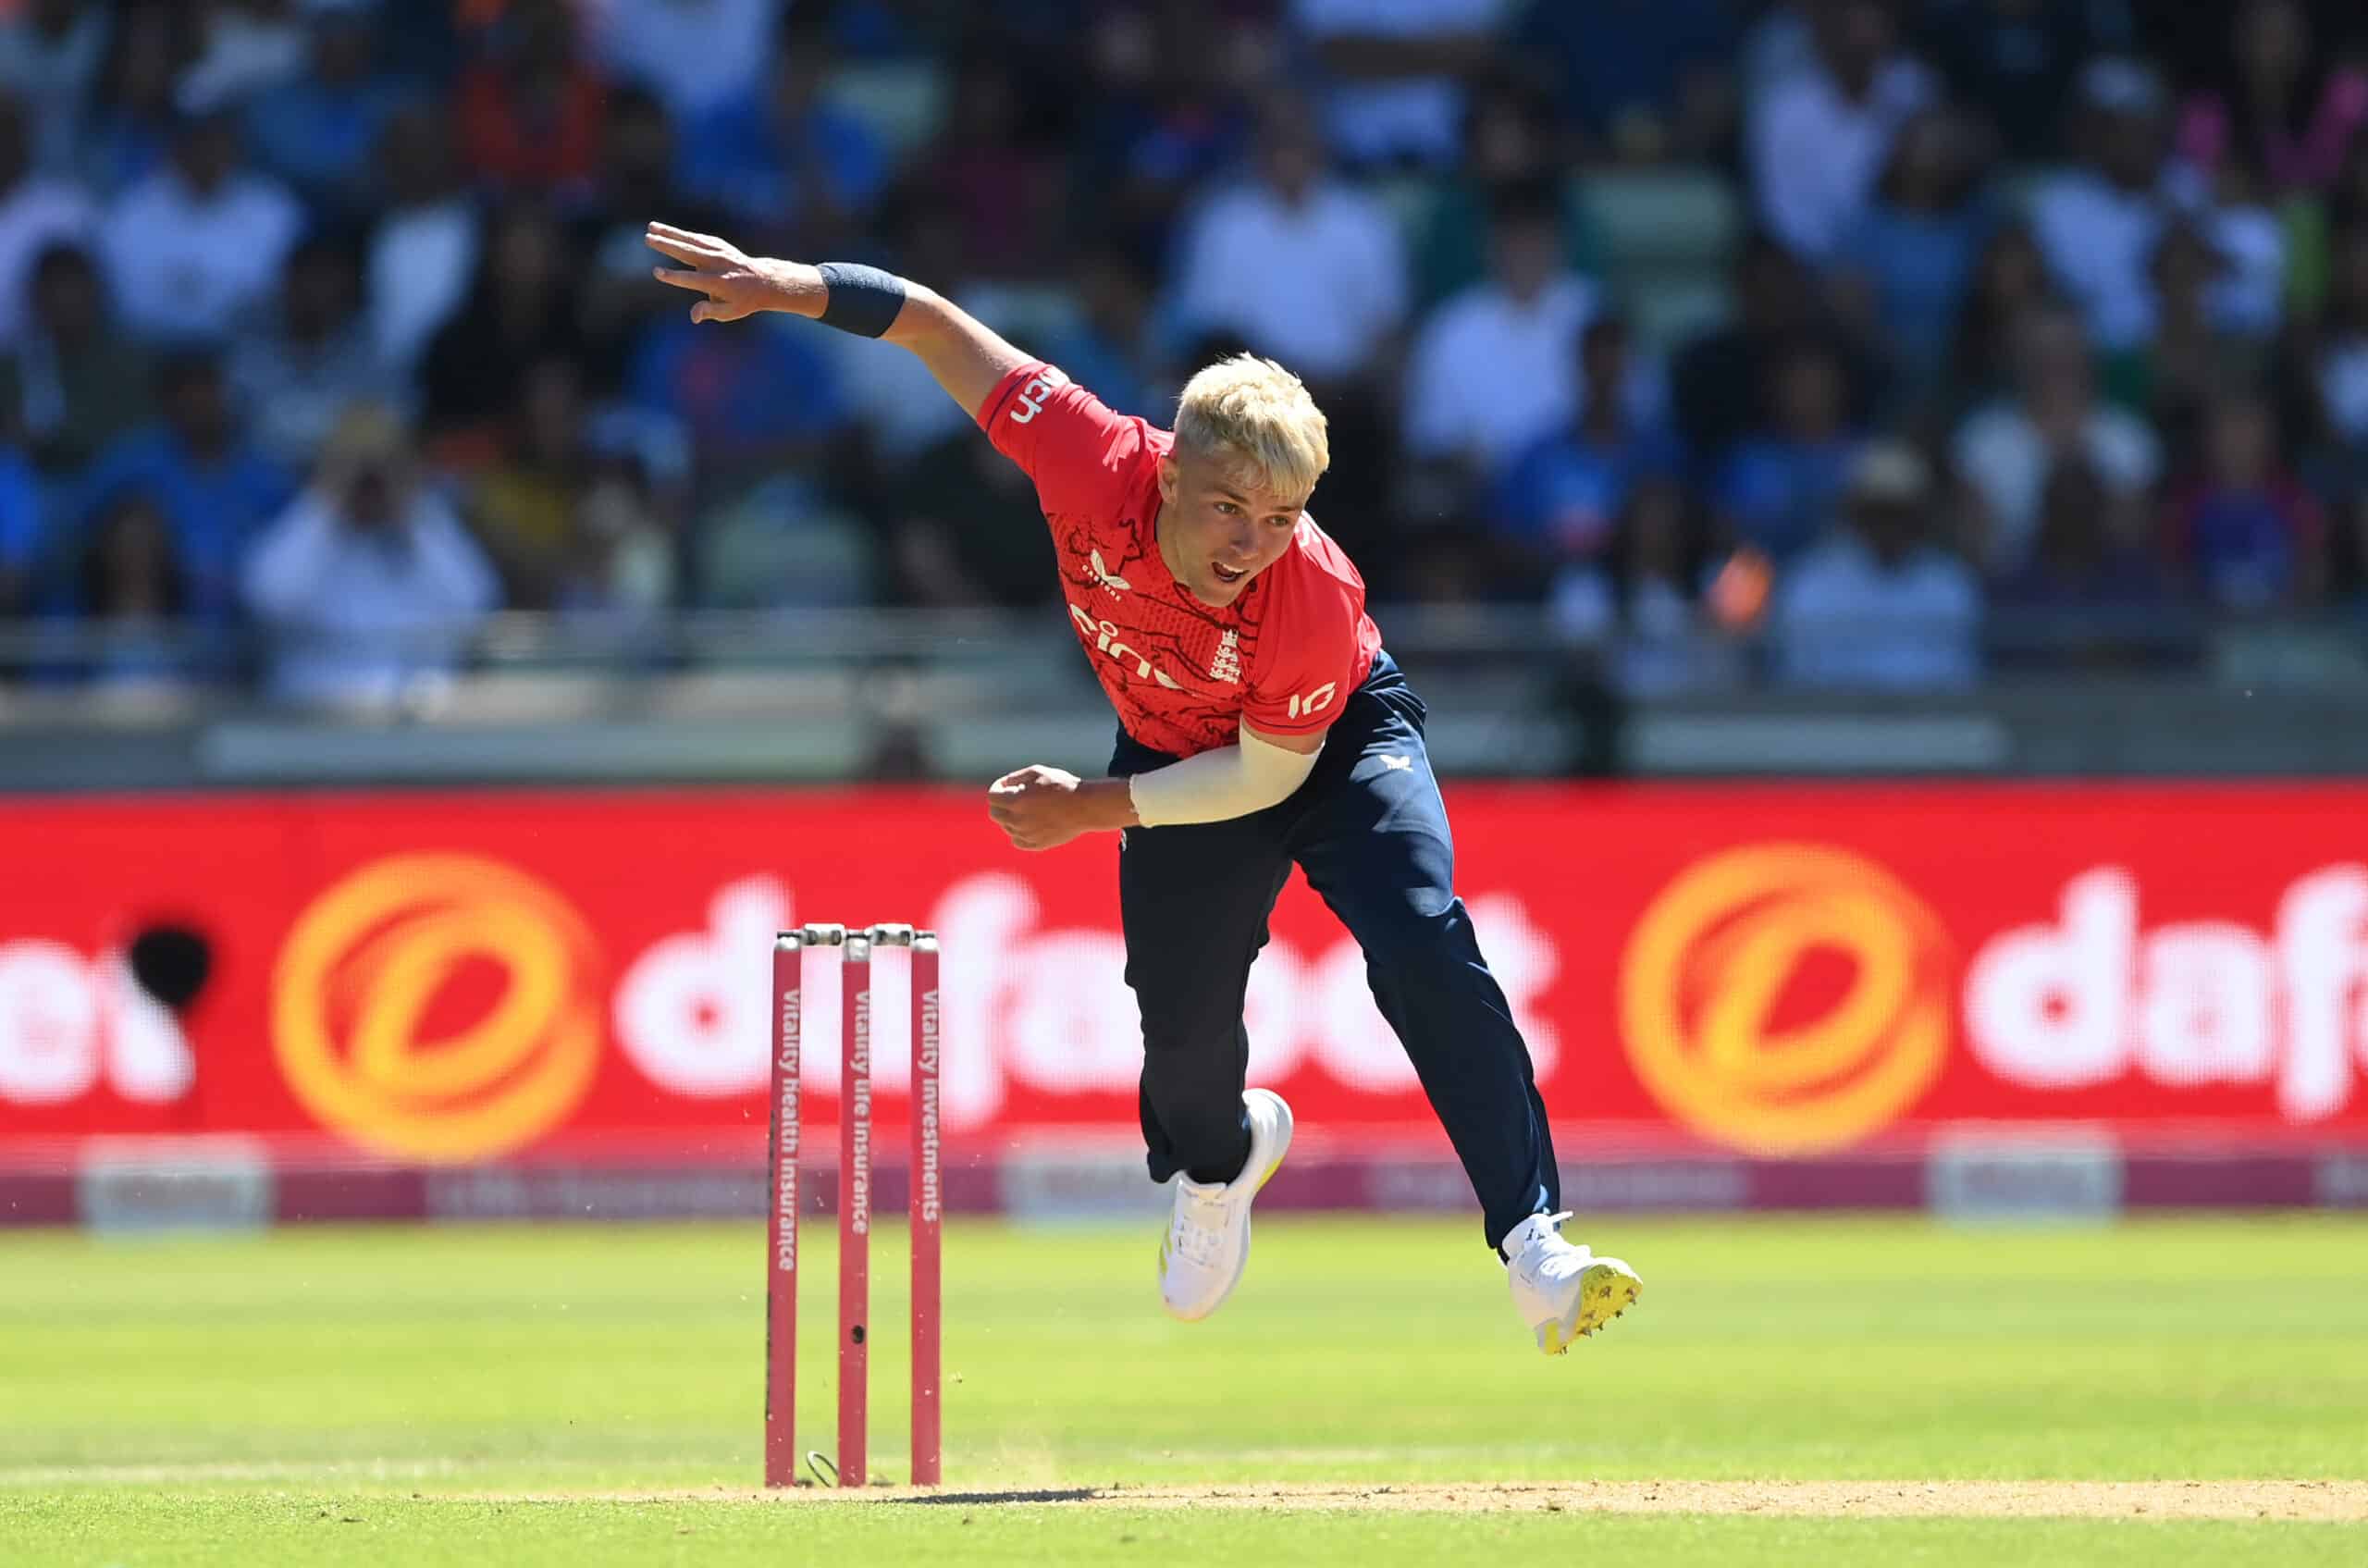 BIRMINGHAM, ENGLAND - JULY 09: England bowler Sam Curran in bowling action during the second Vitality IT20 match between England and India at Edgbaston on July 09, 2022 in Birmingham, England. (Photo by Stu Forster/Getty Images) 1407727112 cricket